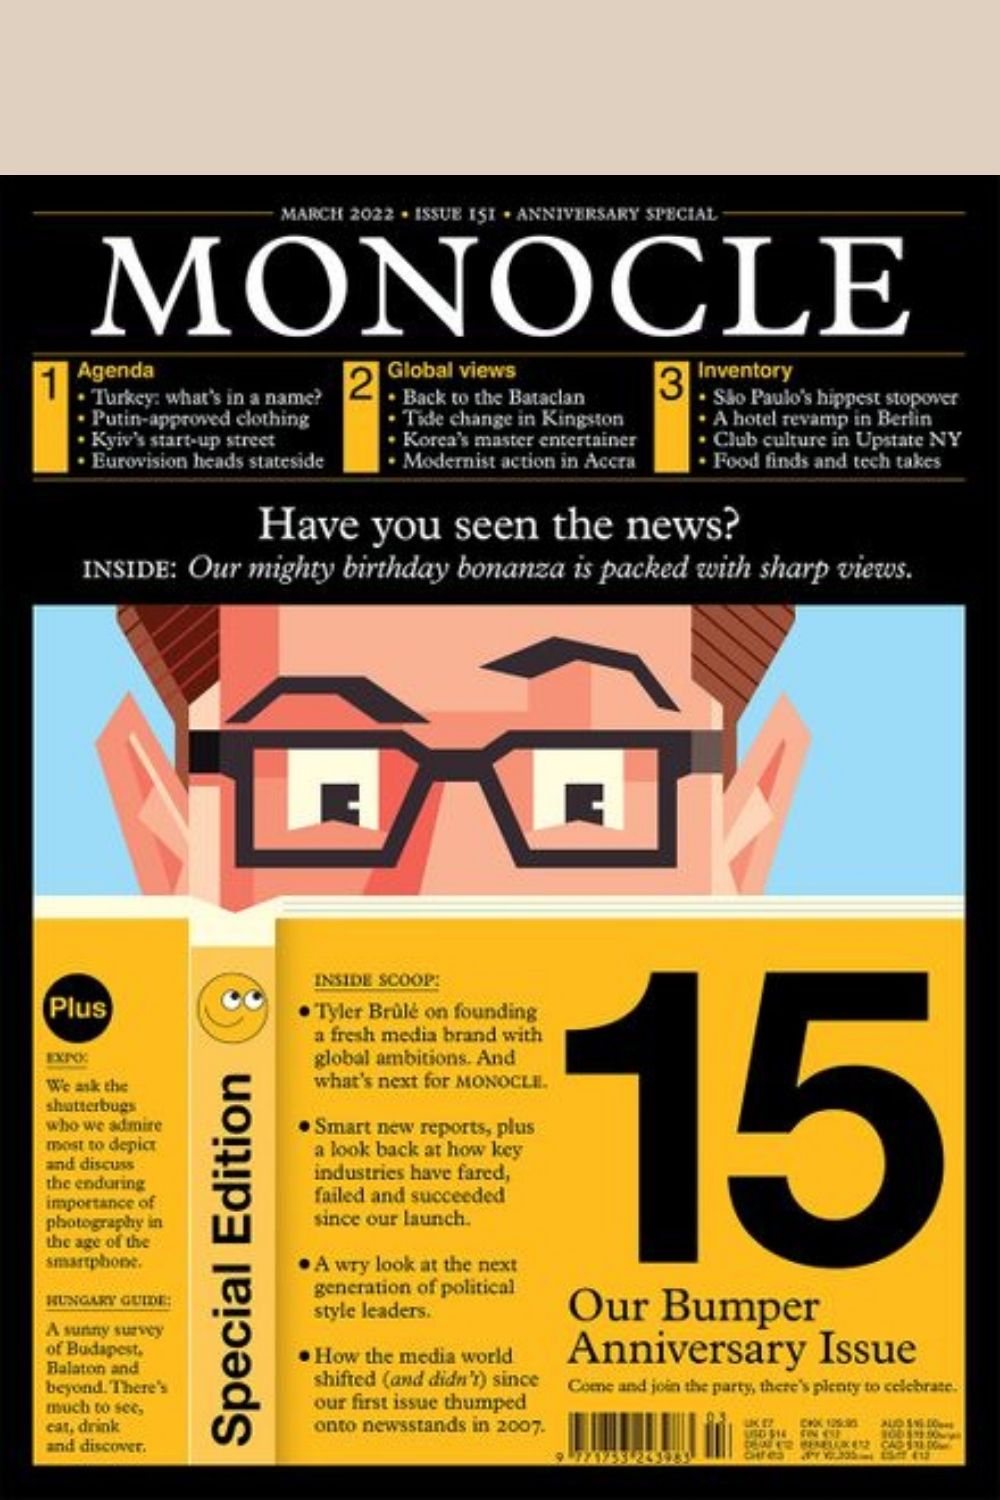 Monocle Magazine Issue 151 March 2022